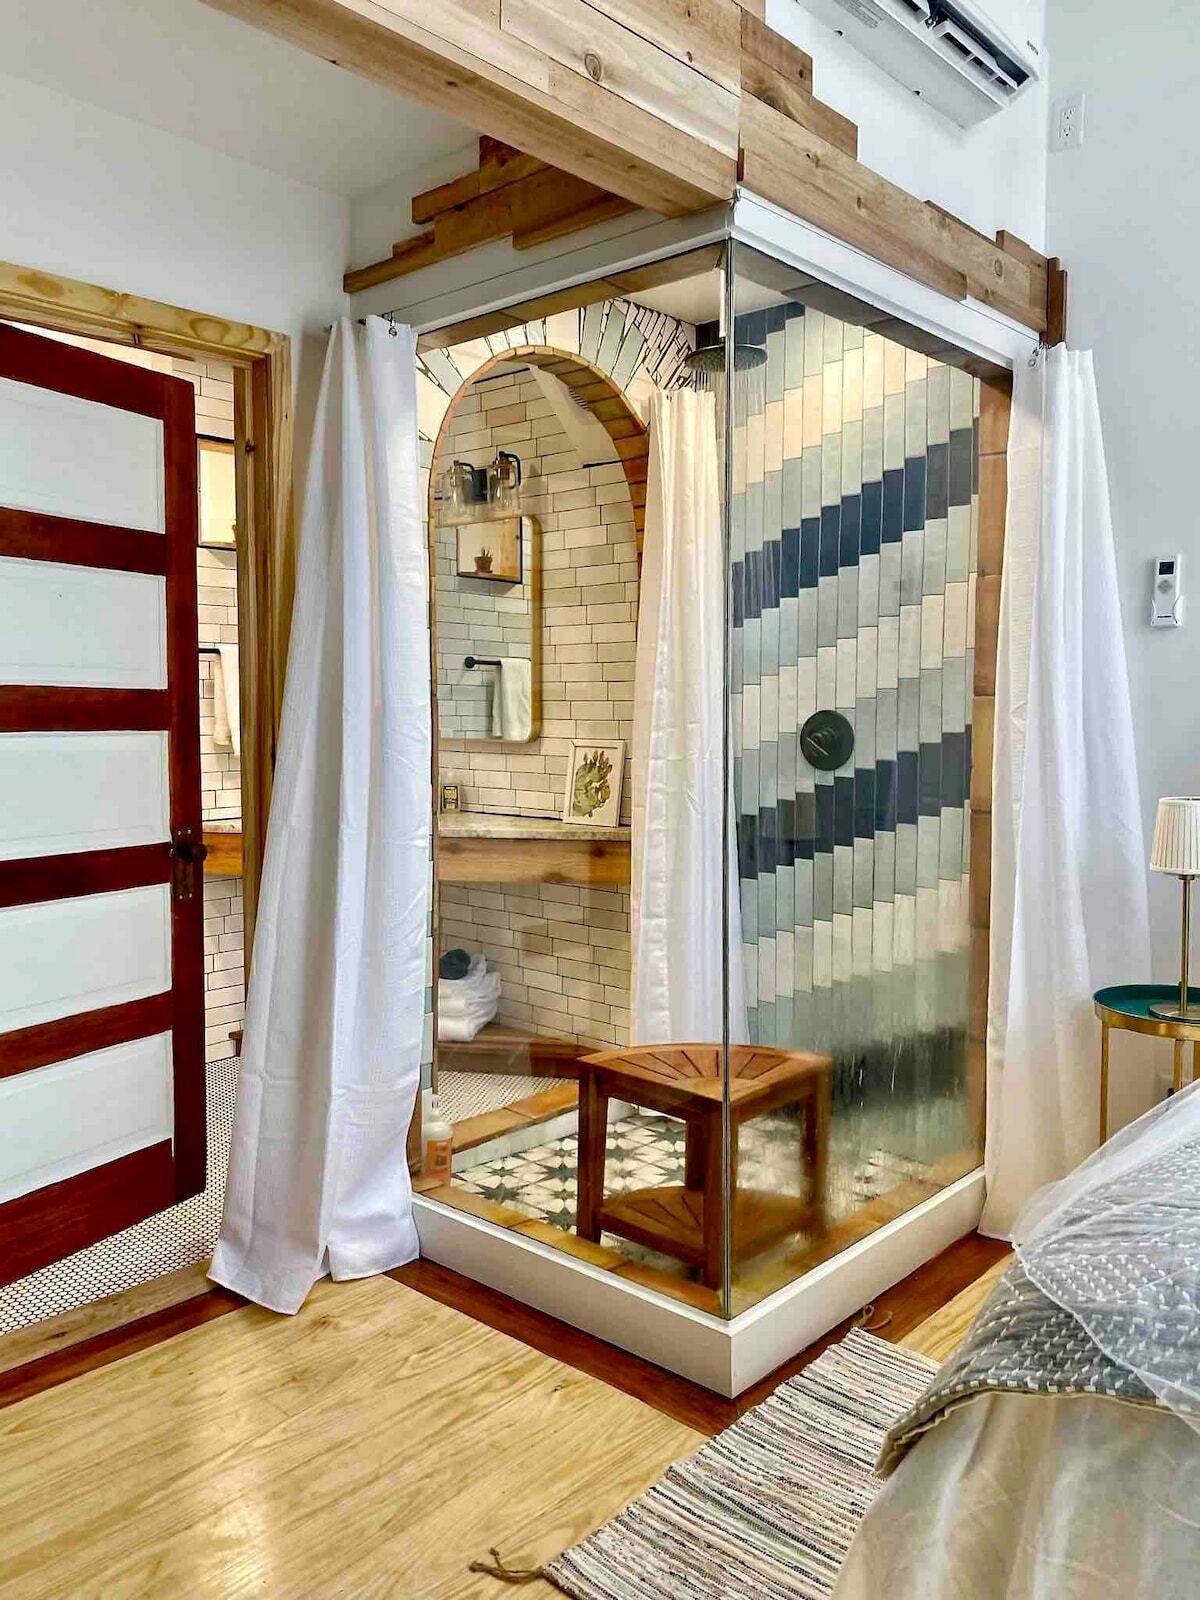 A square shower stall that juts back out into the sleeping area from an artisanally hand-crafted tiled arched entry along the bathroom wall